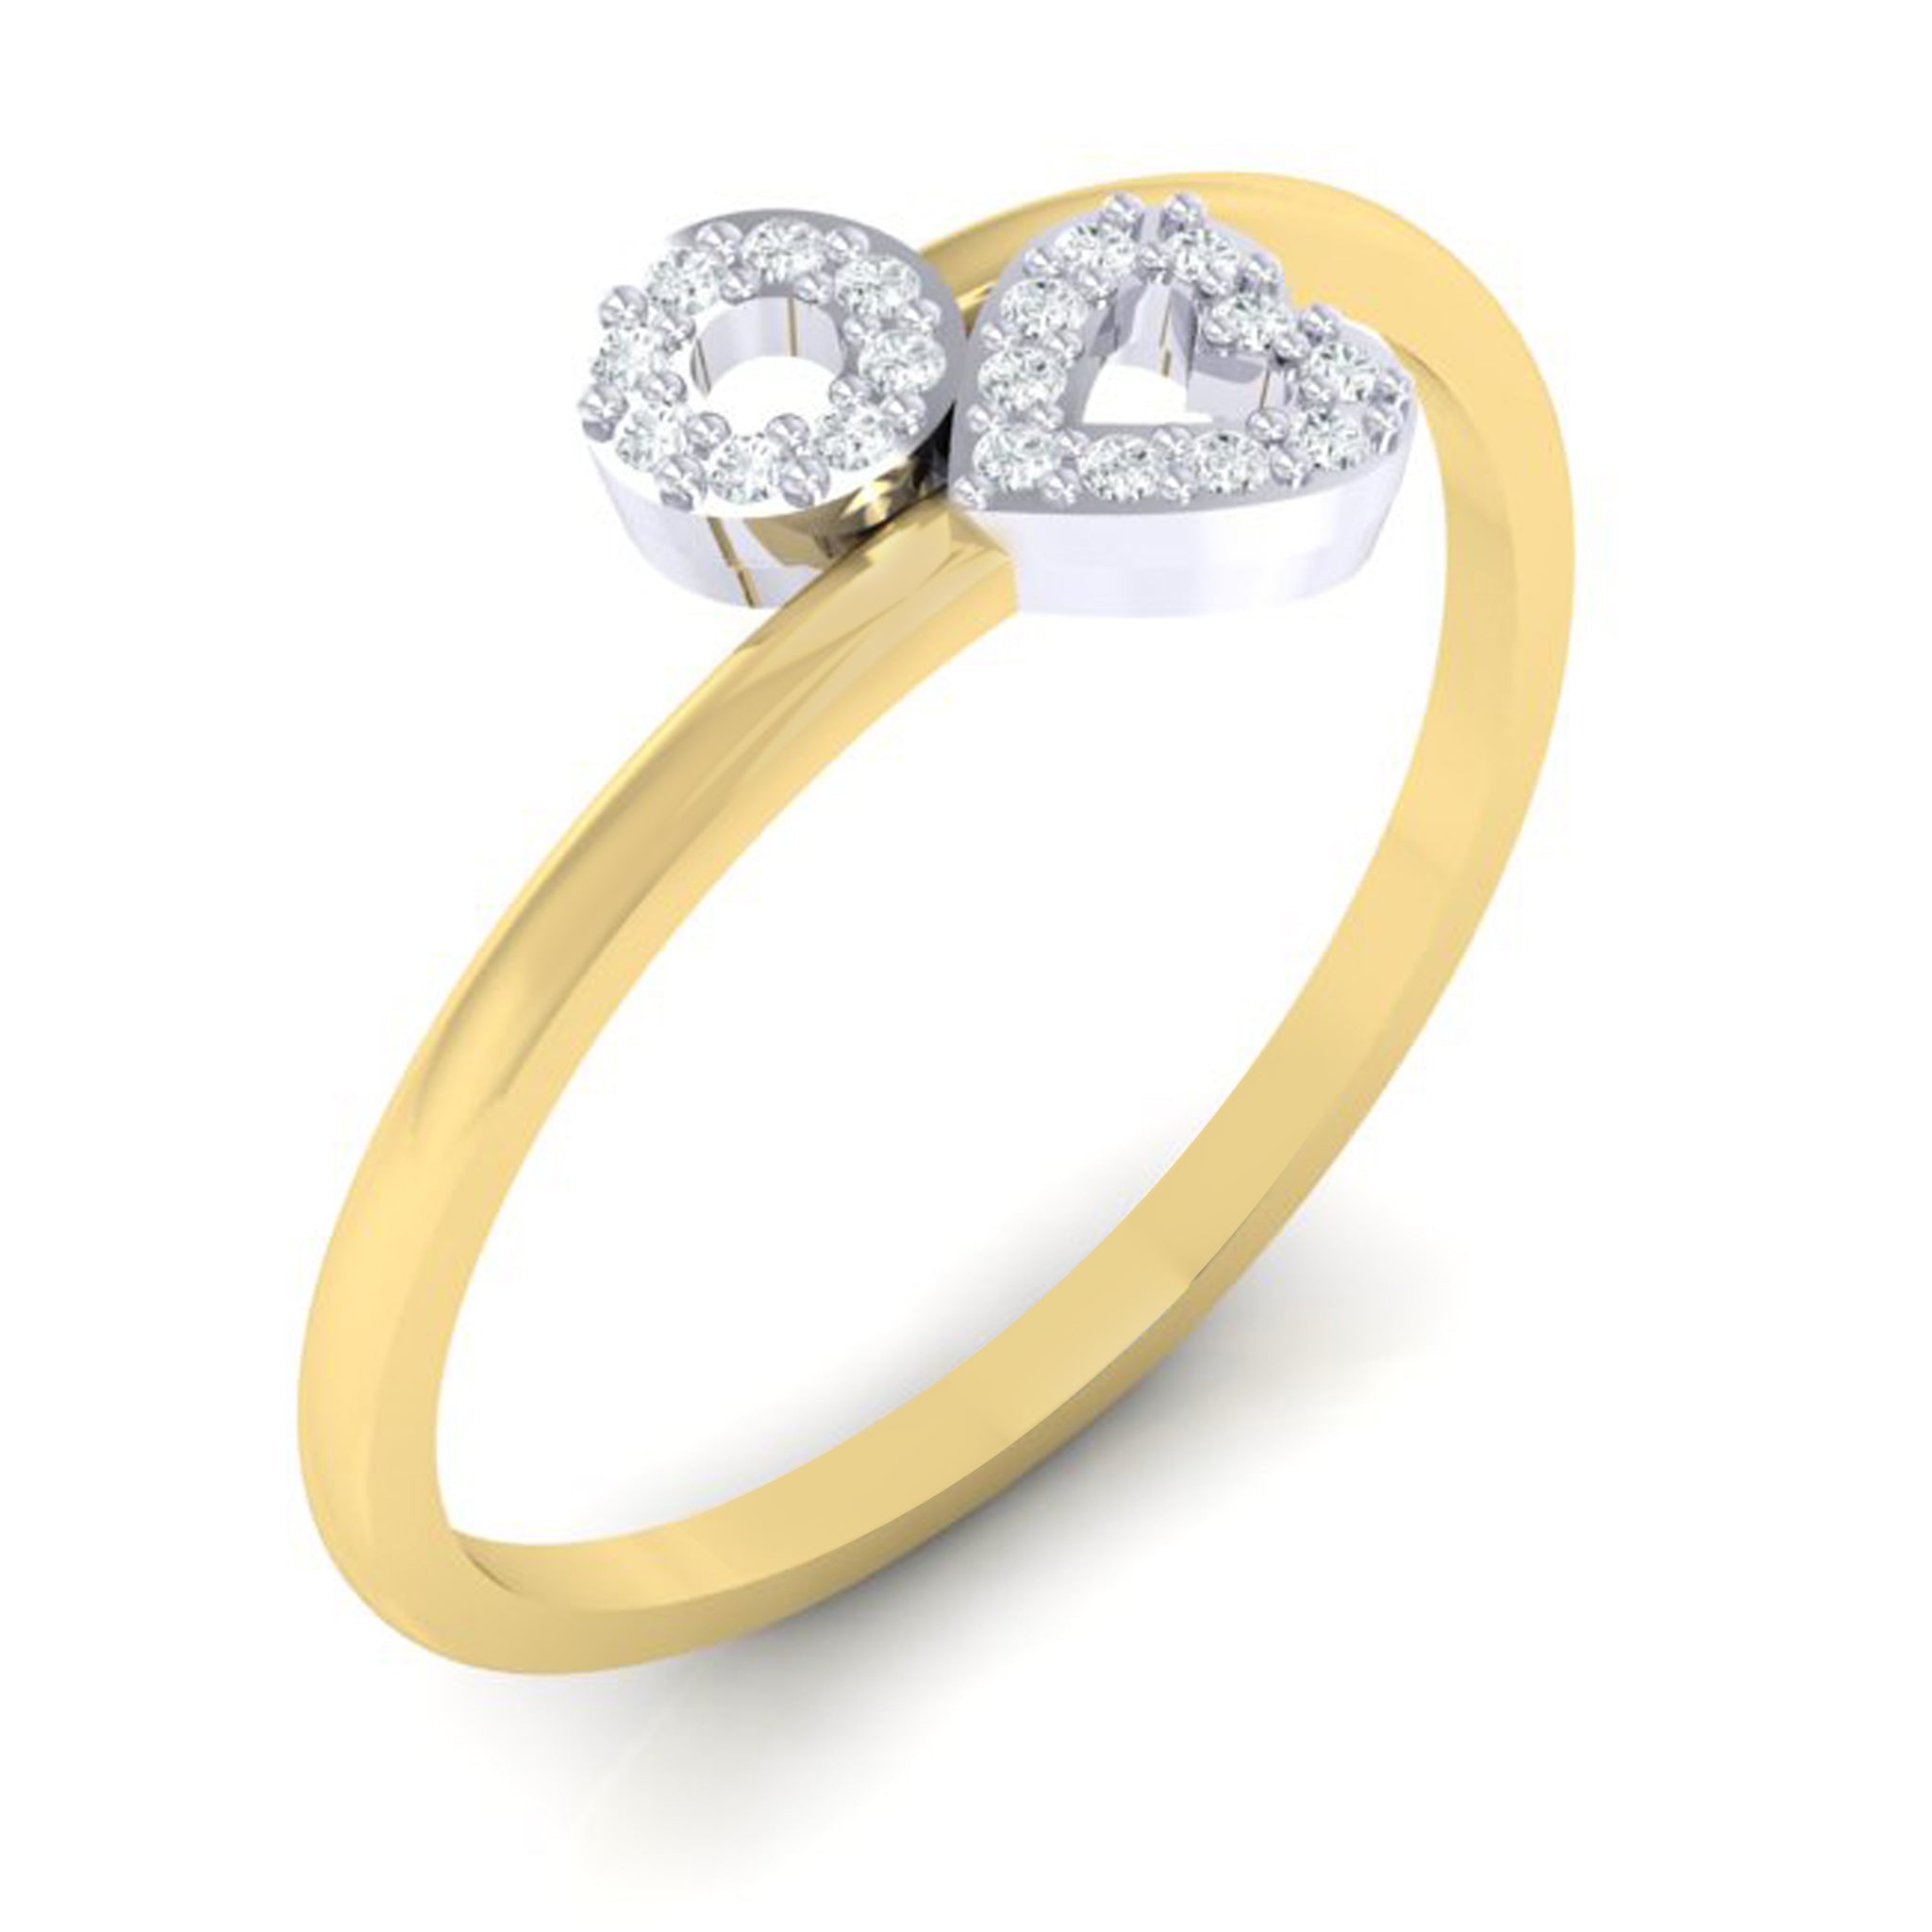 14K YELLOW GOLD HEART INITIAL RING | Patty Q's Jewelry Inc